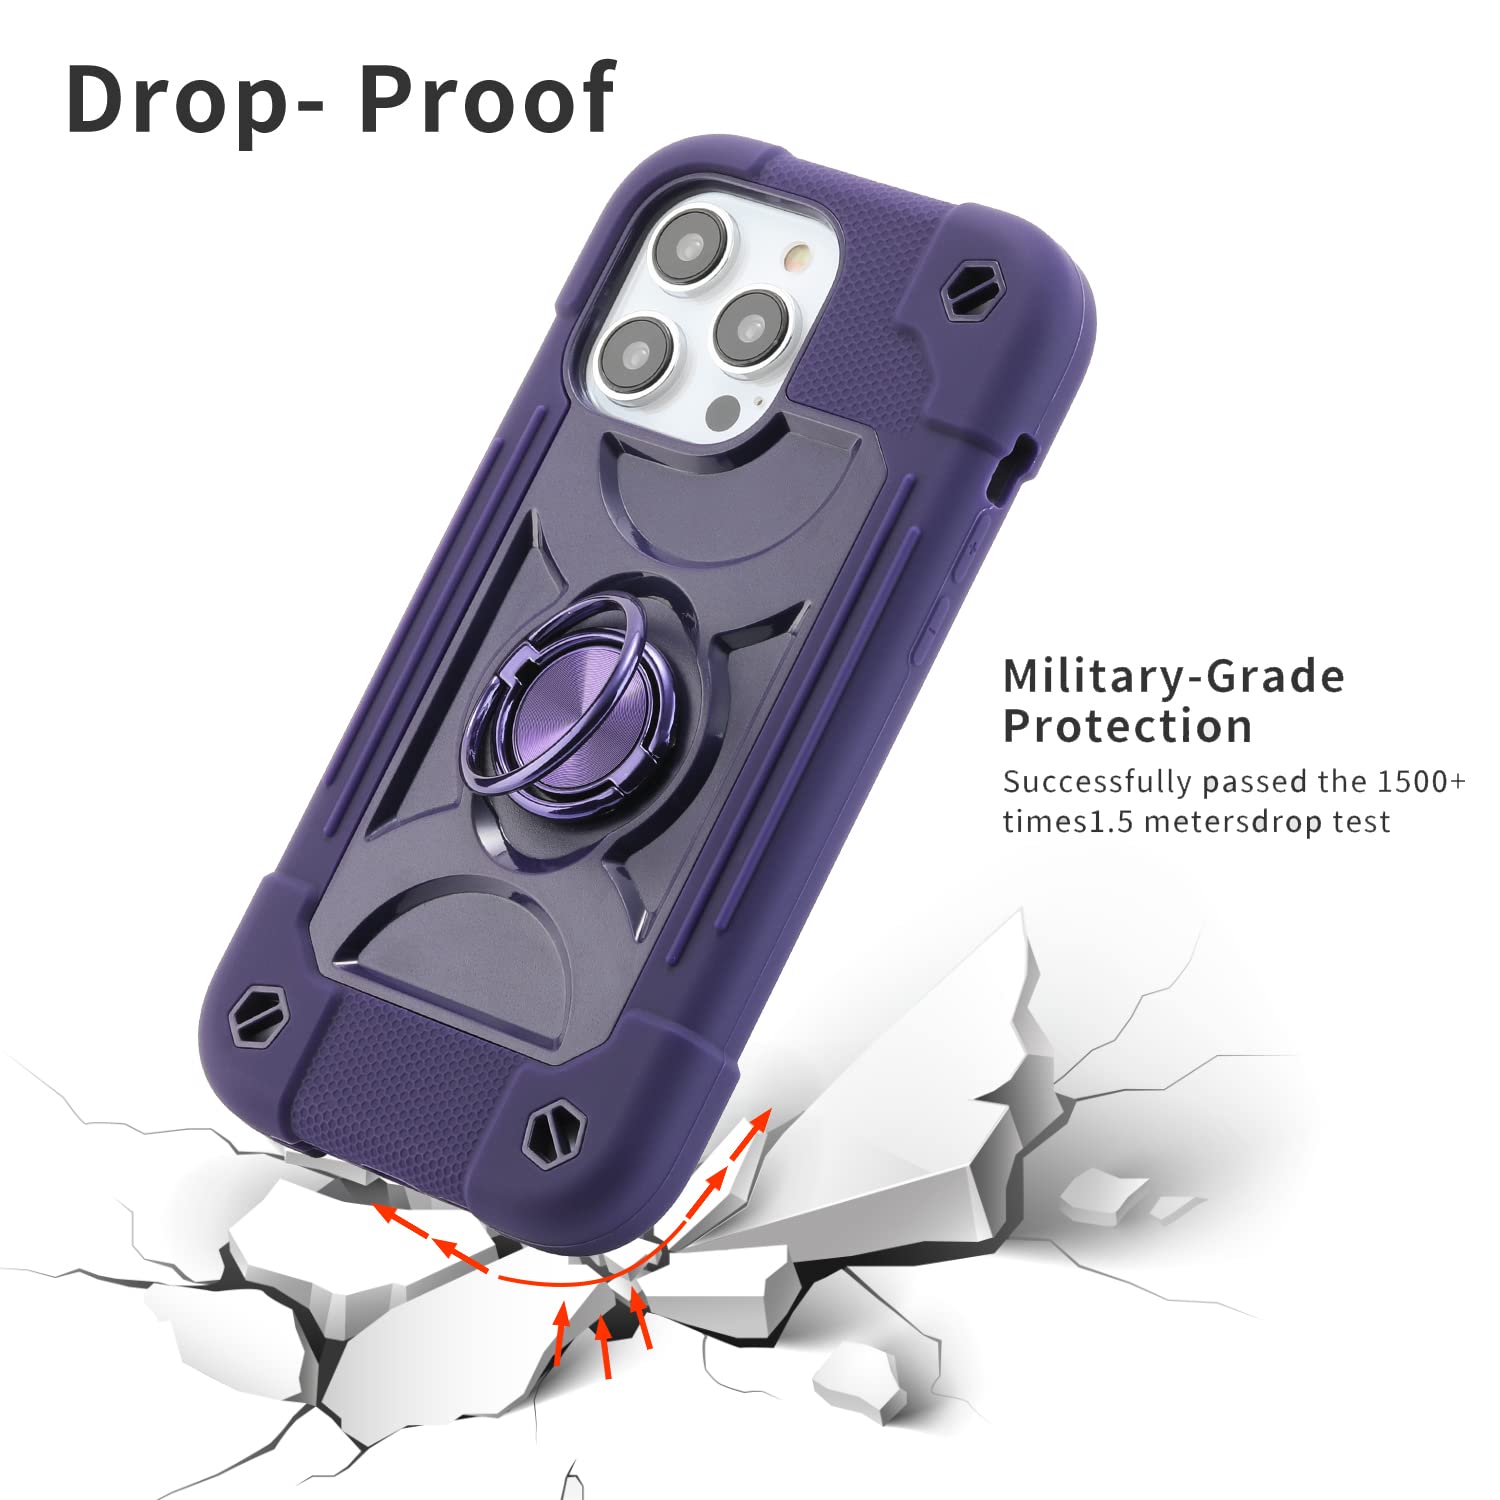 MARKILL Compatible with iPhone 14 Pro Max Case 6.7 Inch with Ring Stand, [Soft Silicone and Hard Plastic ] Heavy-Duty Military Grade Shockproof Phone Cover for iPhone 14 Pro Max. (Deep Purple)